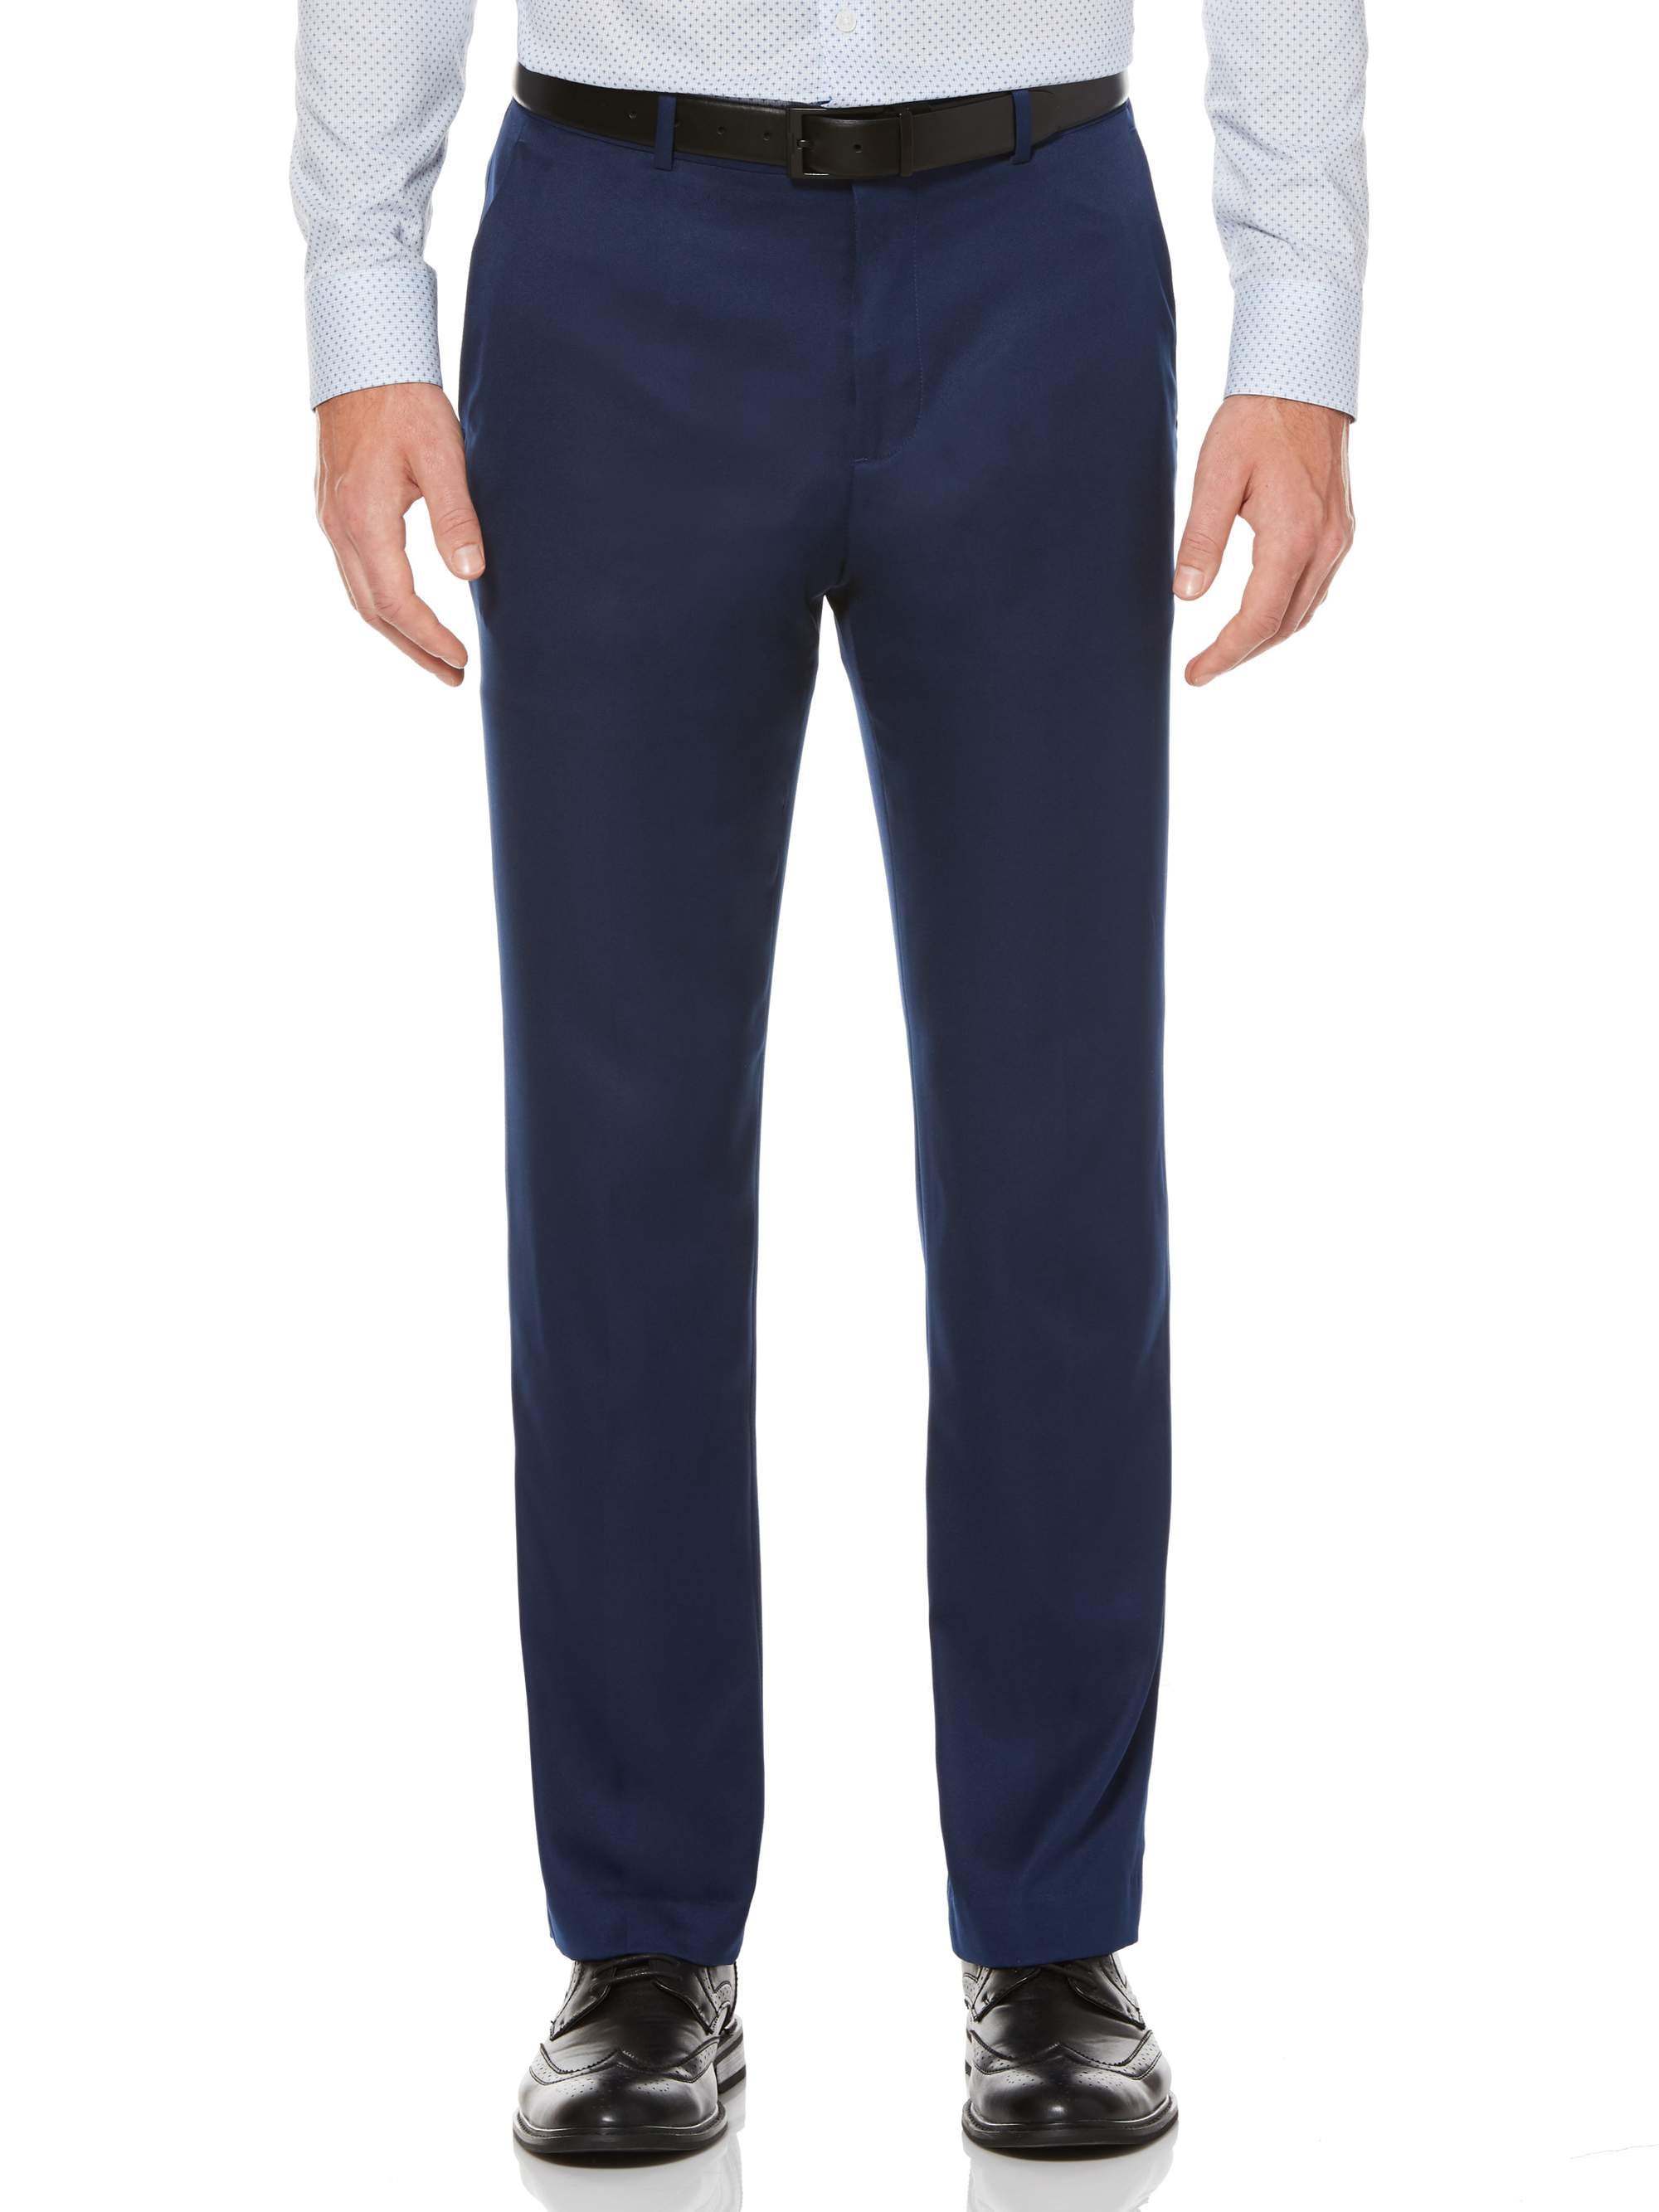 Slim Fit Nailshead Pant with Stretch Waistband - Walmart.com